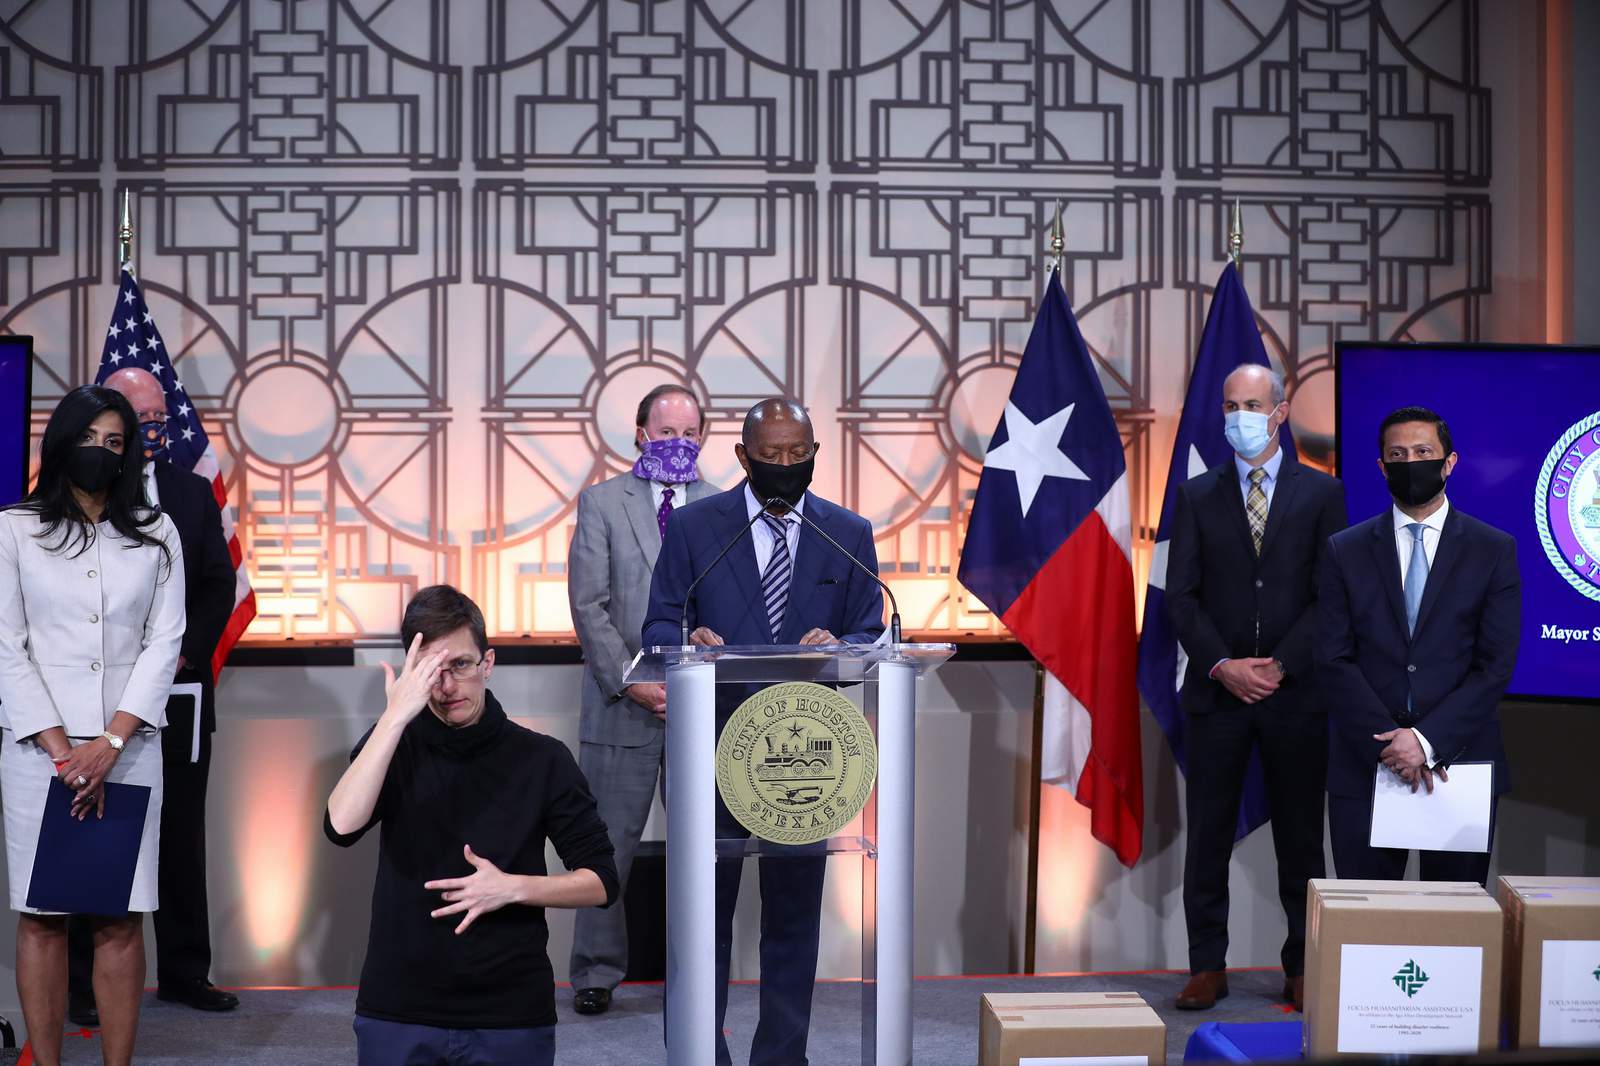 Mayor Turner accepts donation of 500,000 masks from Focus Humanitarian Assistance USA and Ismaili Council for Southwestern US